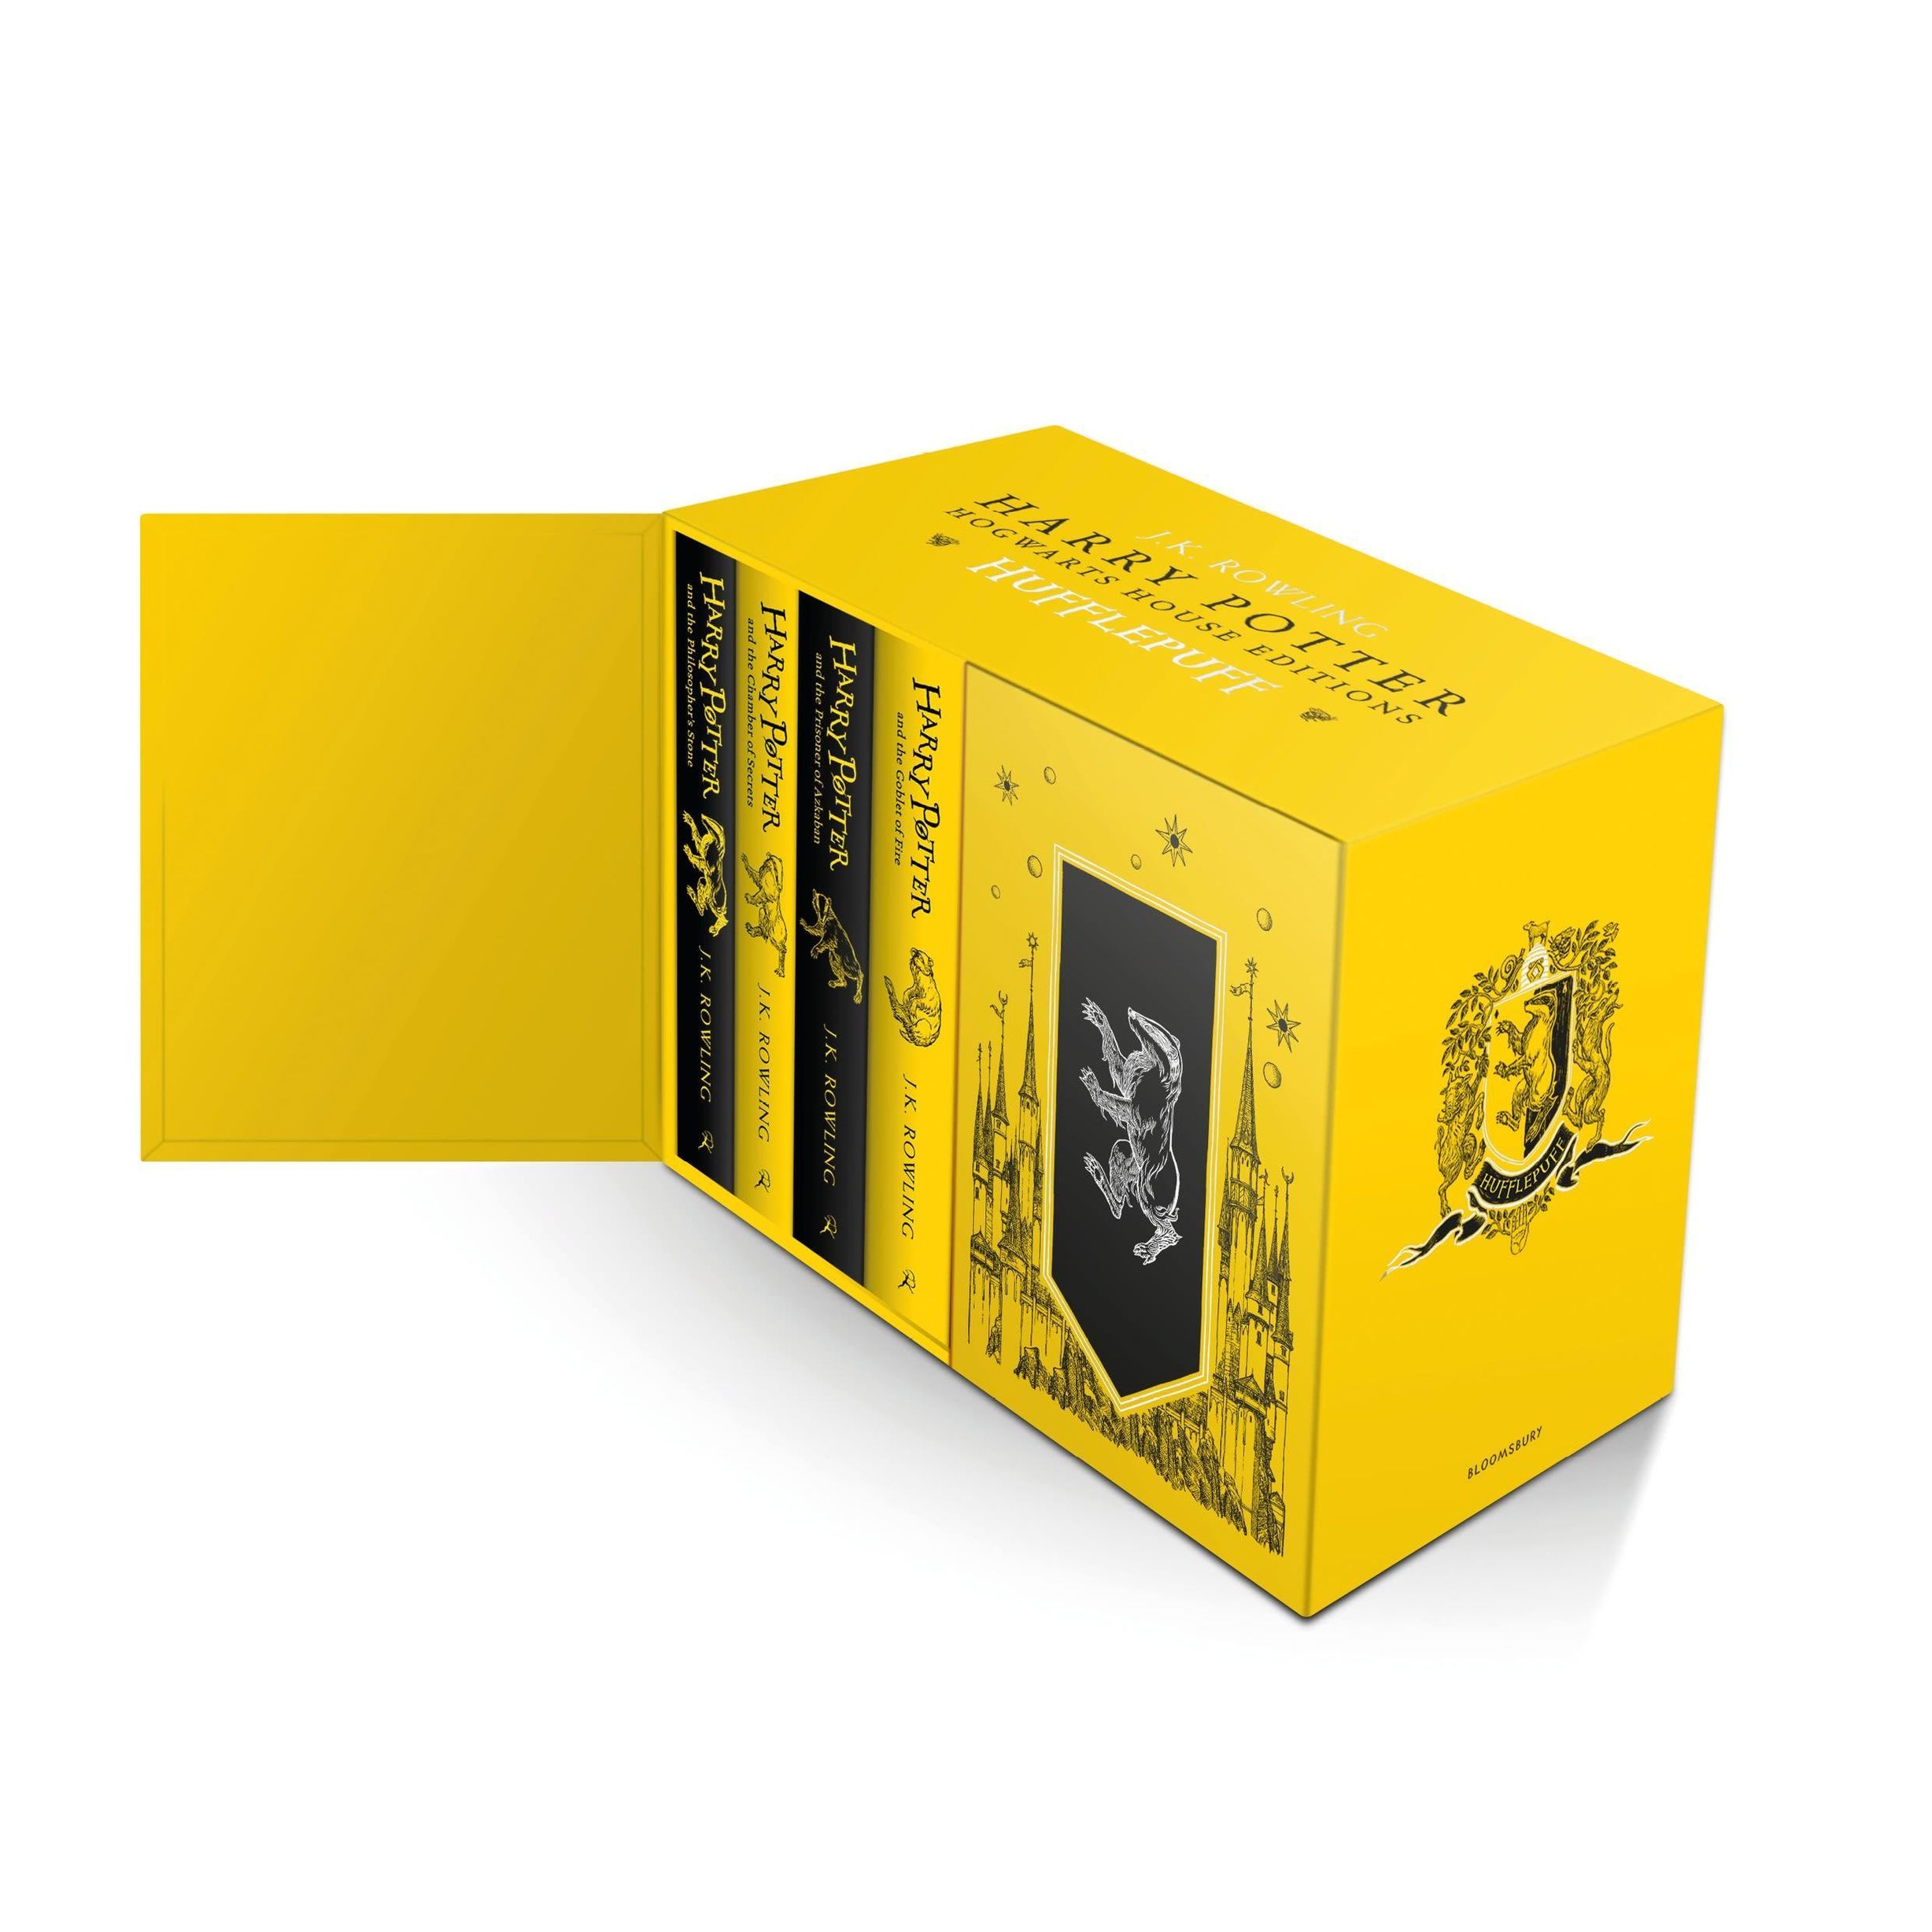 Harry Potter Hufflepuff House Editions Hardback Box Set, m. Buch, m. Buch,  m. Buch, m. Buch, m. Buch, m. Buch, m. | Weltbild.at